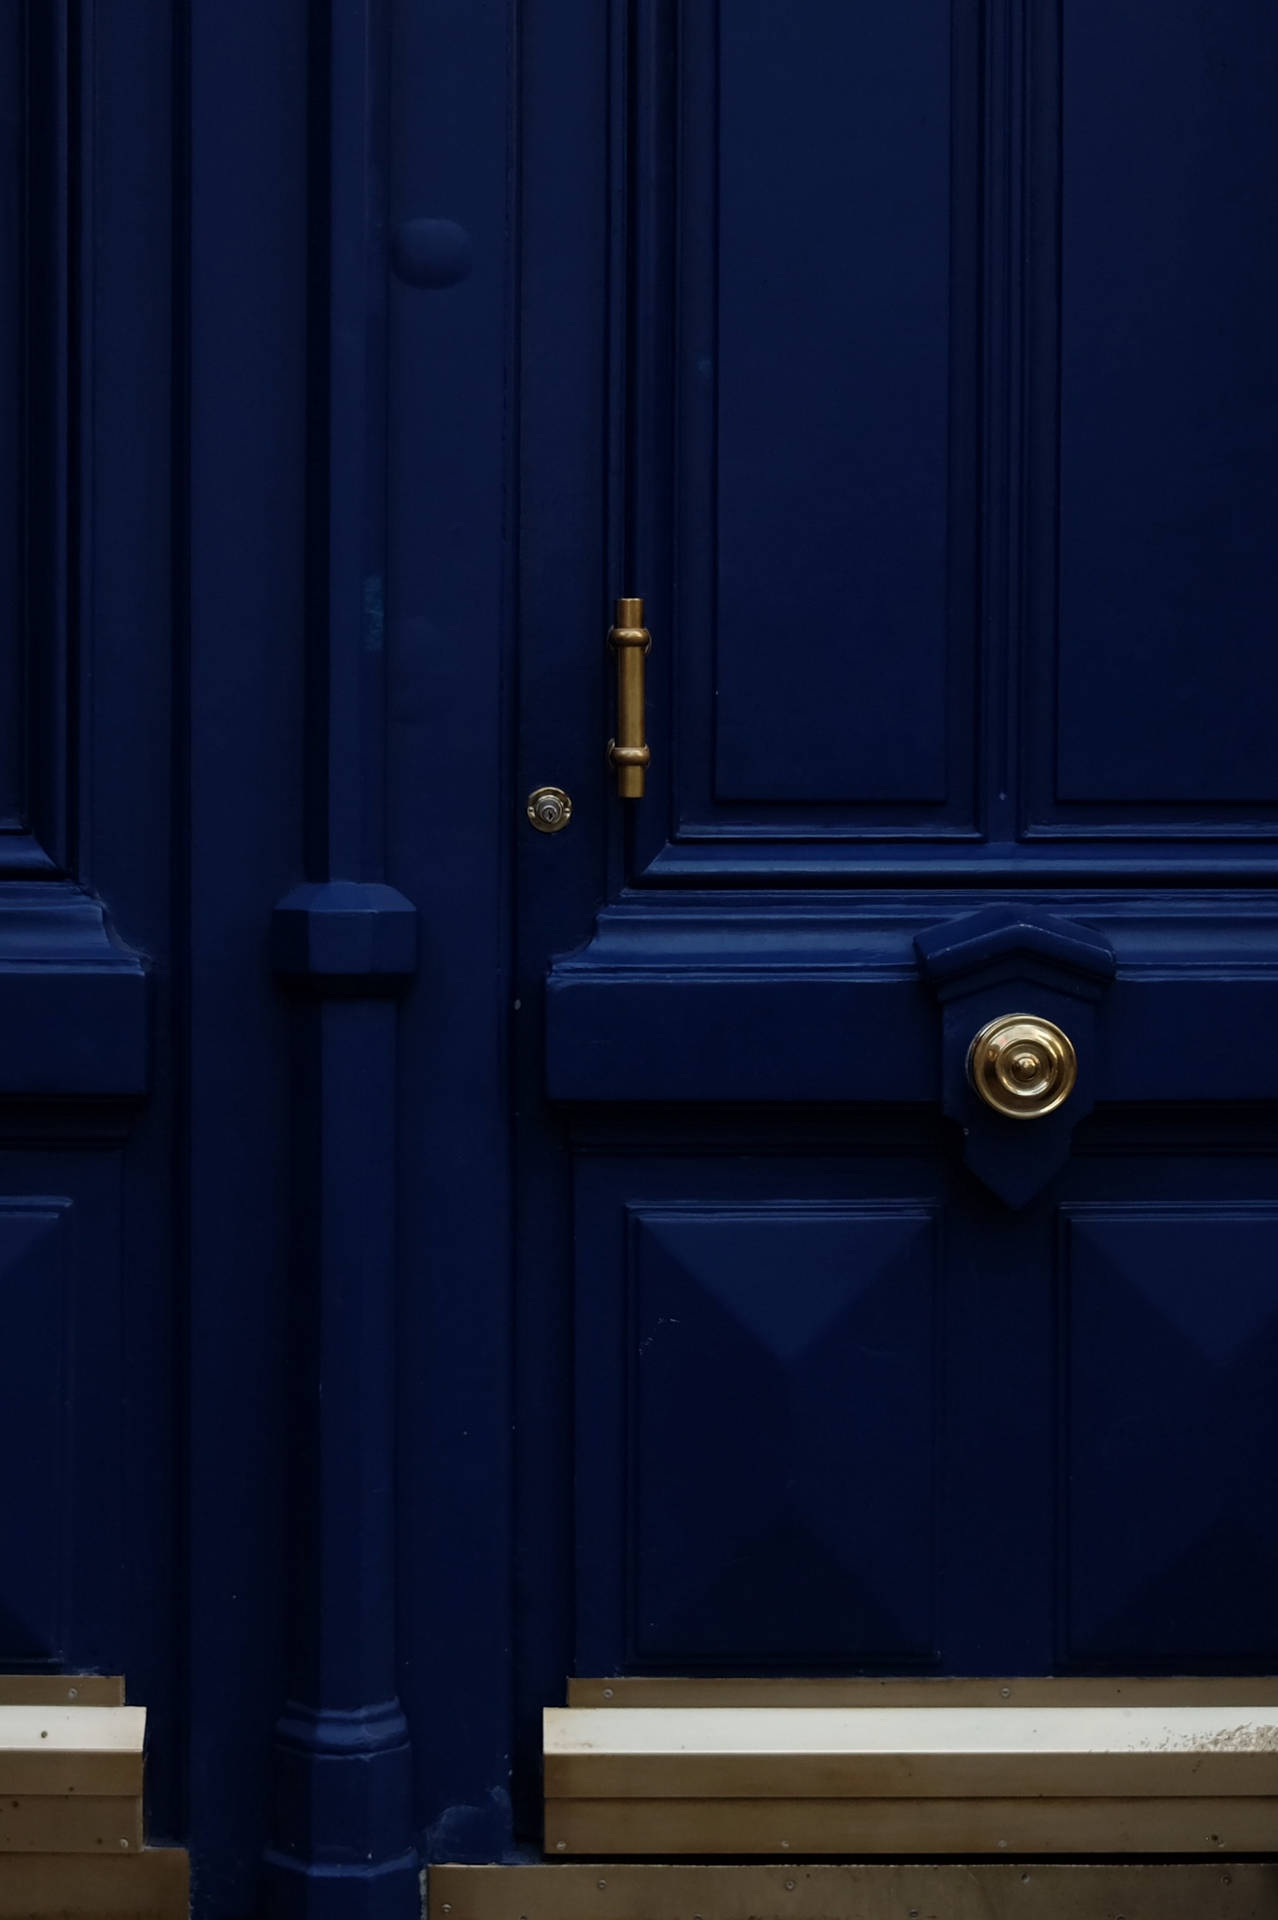 Royal Blue Door With Gold Knob